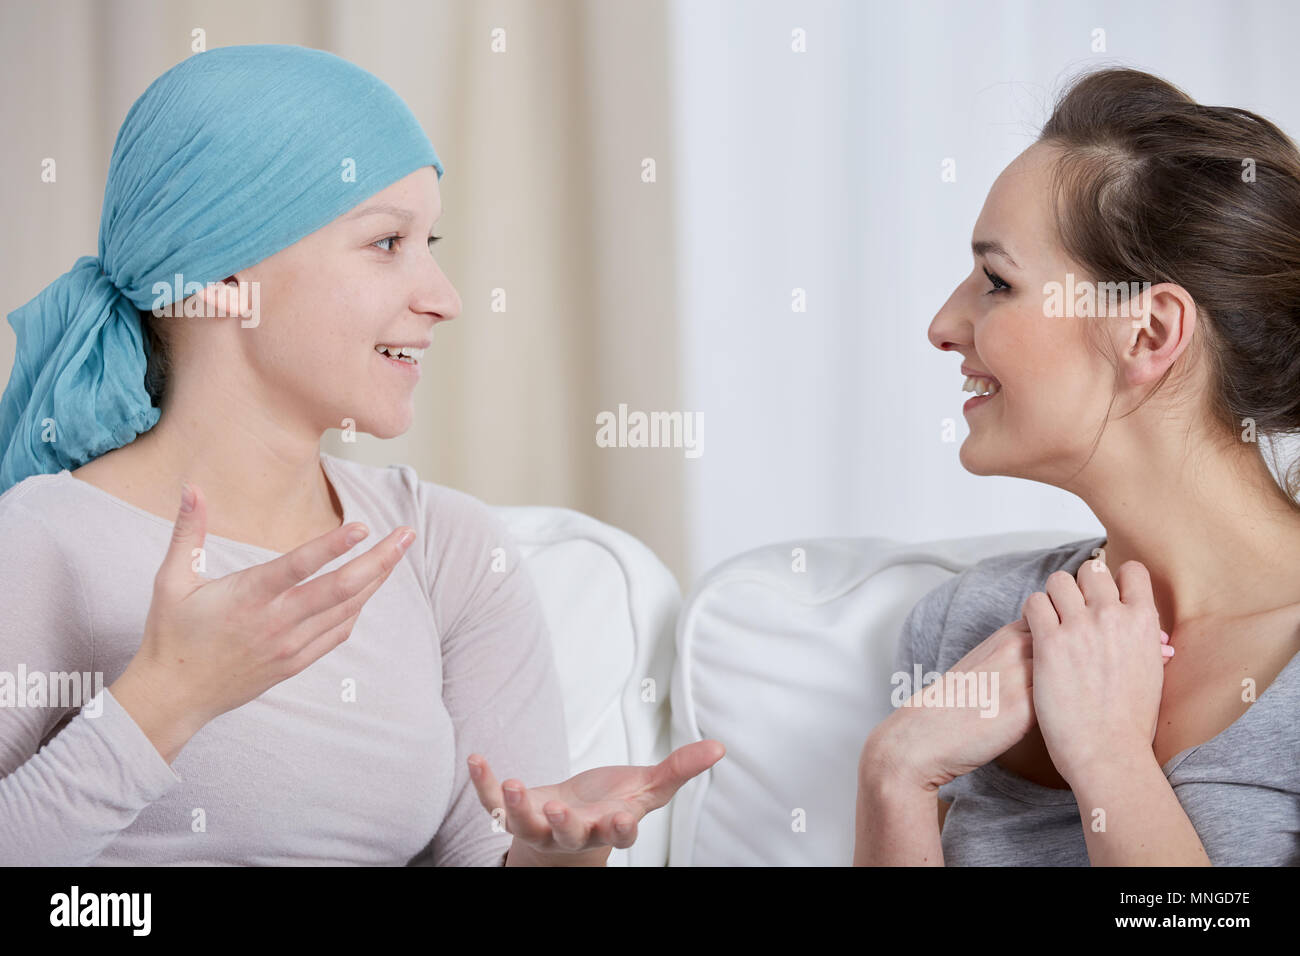 Young cancer woman wearing headscarf, talking with friend Stock Photo